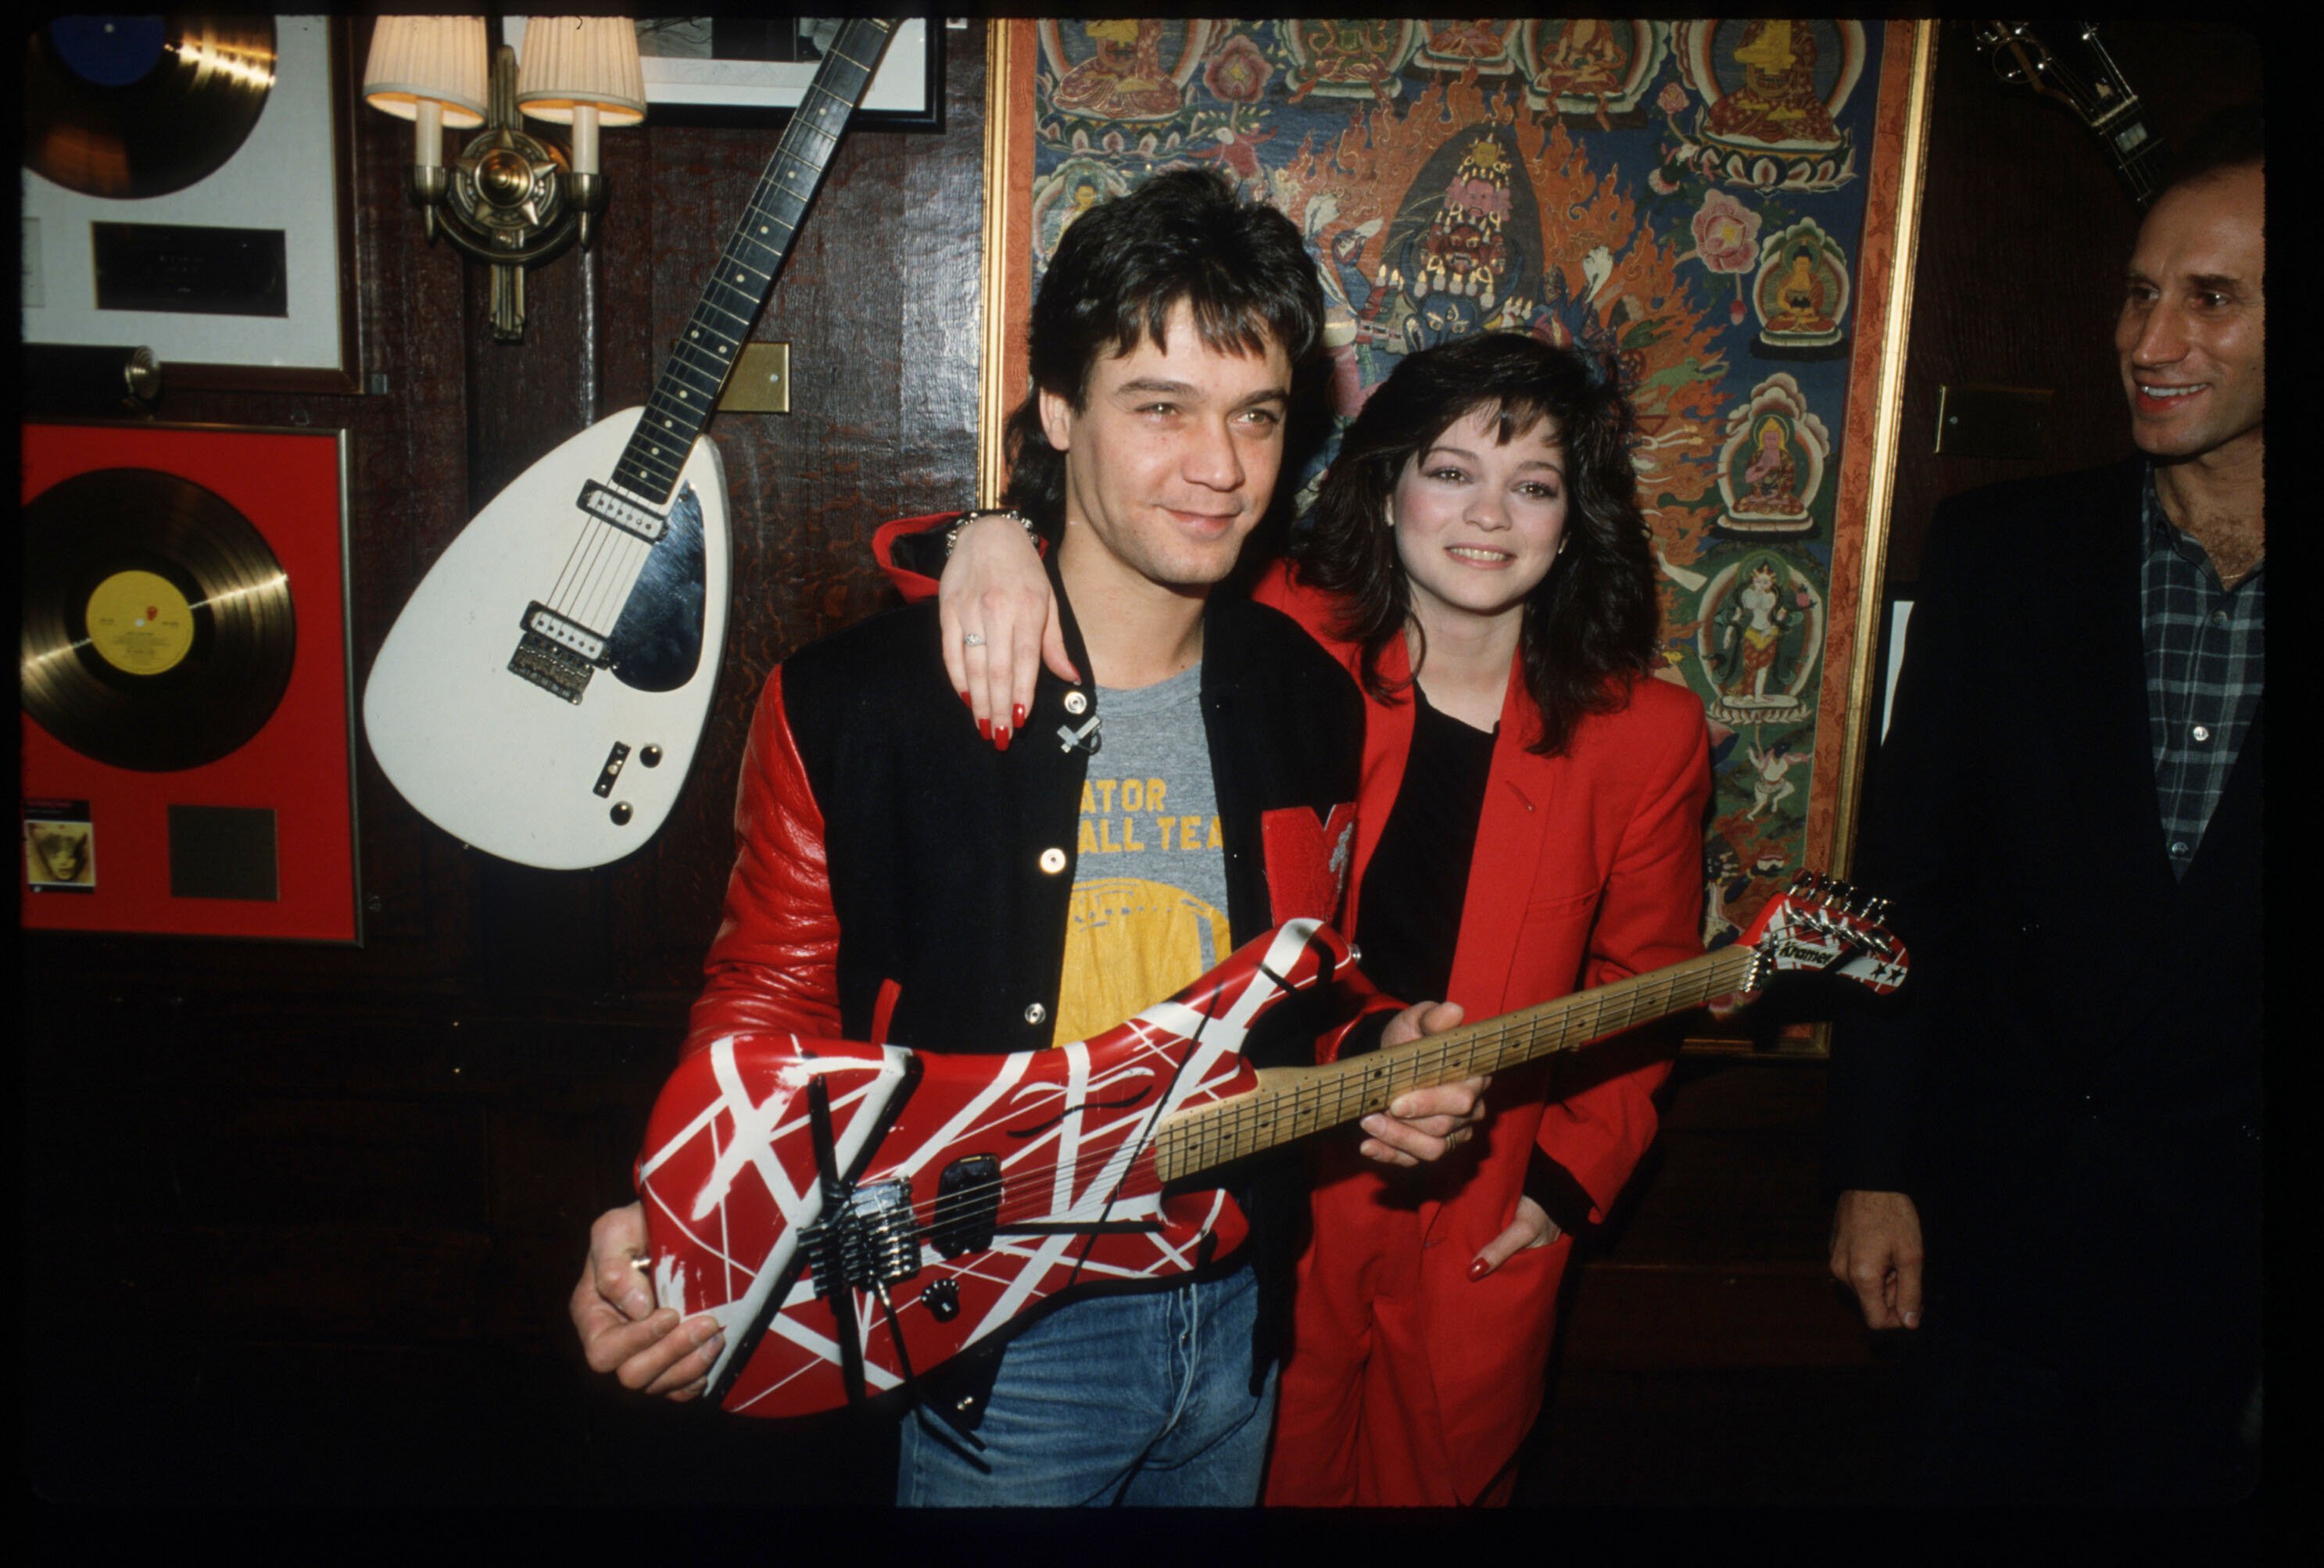 Eddie Van Halen and Valerie Bertinelli at the Hard Rock Café on February 18, 1995 in New York City | Source: Getty Images